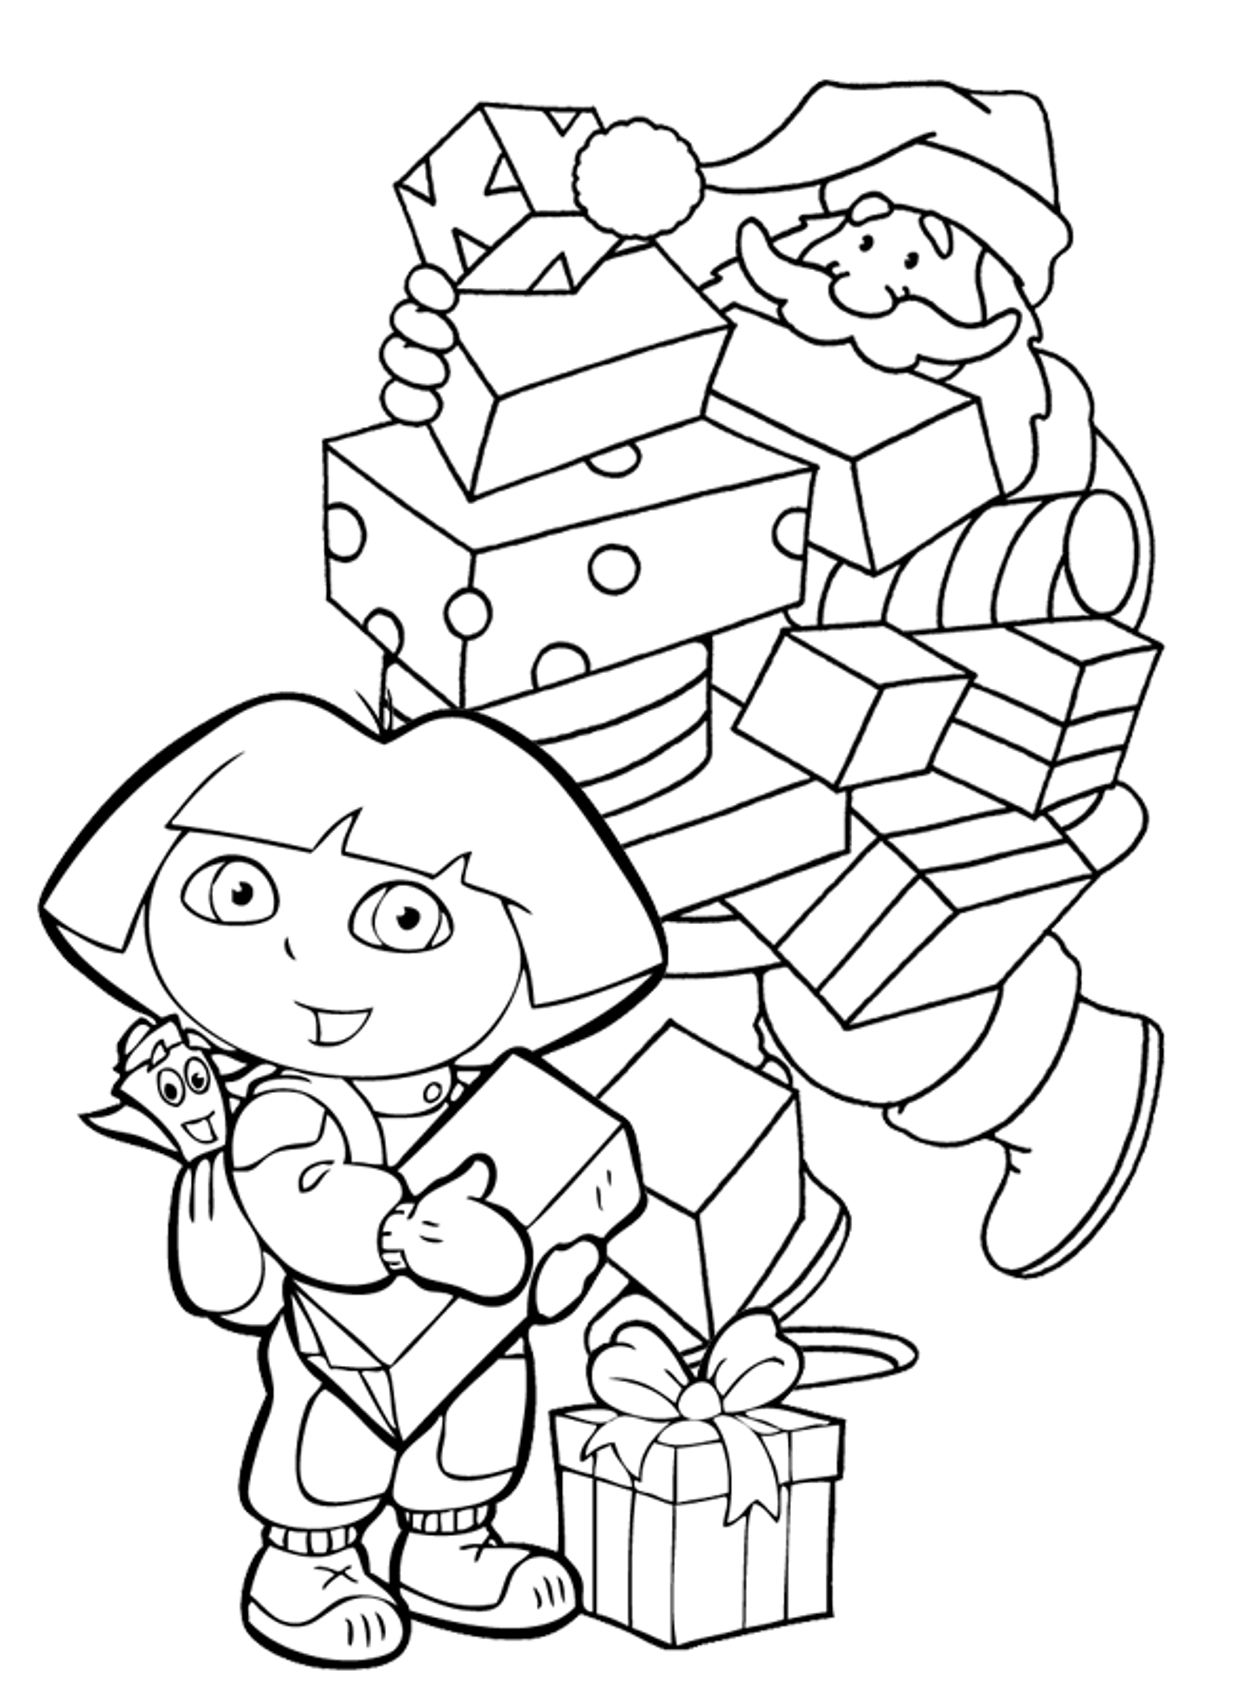 Dora Outline For Colouring | Dora coloring, Dora drawing, Crayola coloring  pages